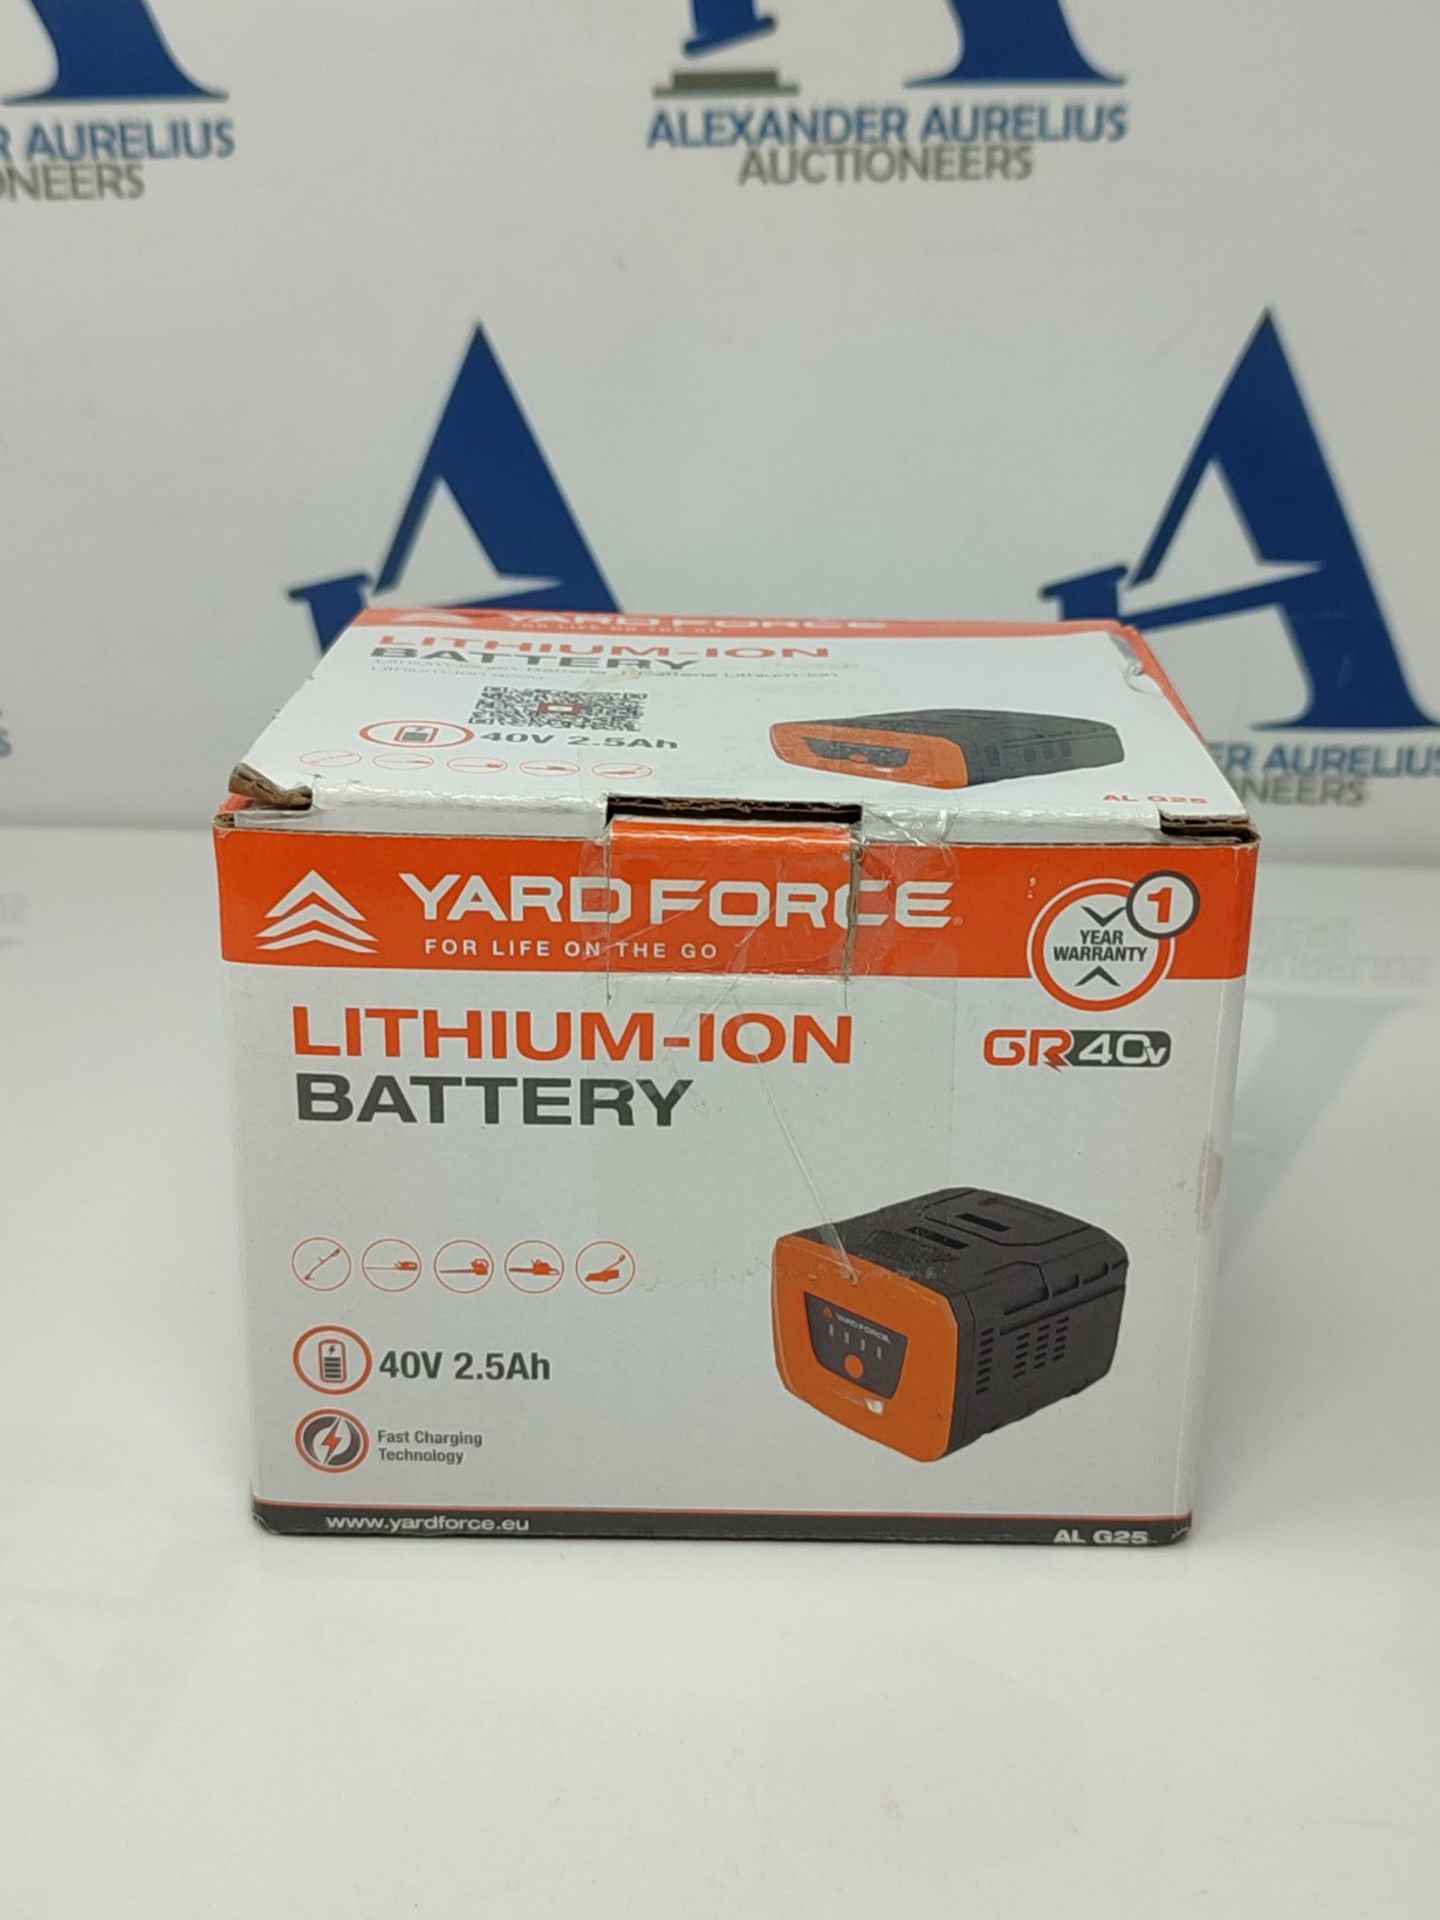 RRP £79.00 Yard Force Battery 40V 2.5Ah Lithium-Ion Battery for Garden Tools, with Overload Prote - Image 2 of 3